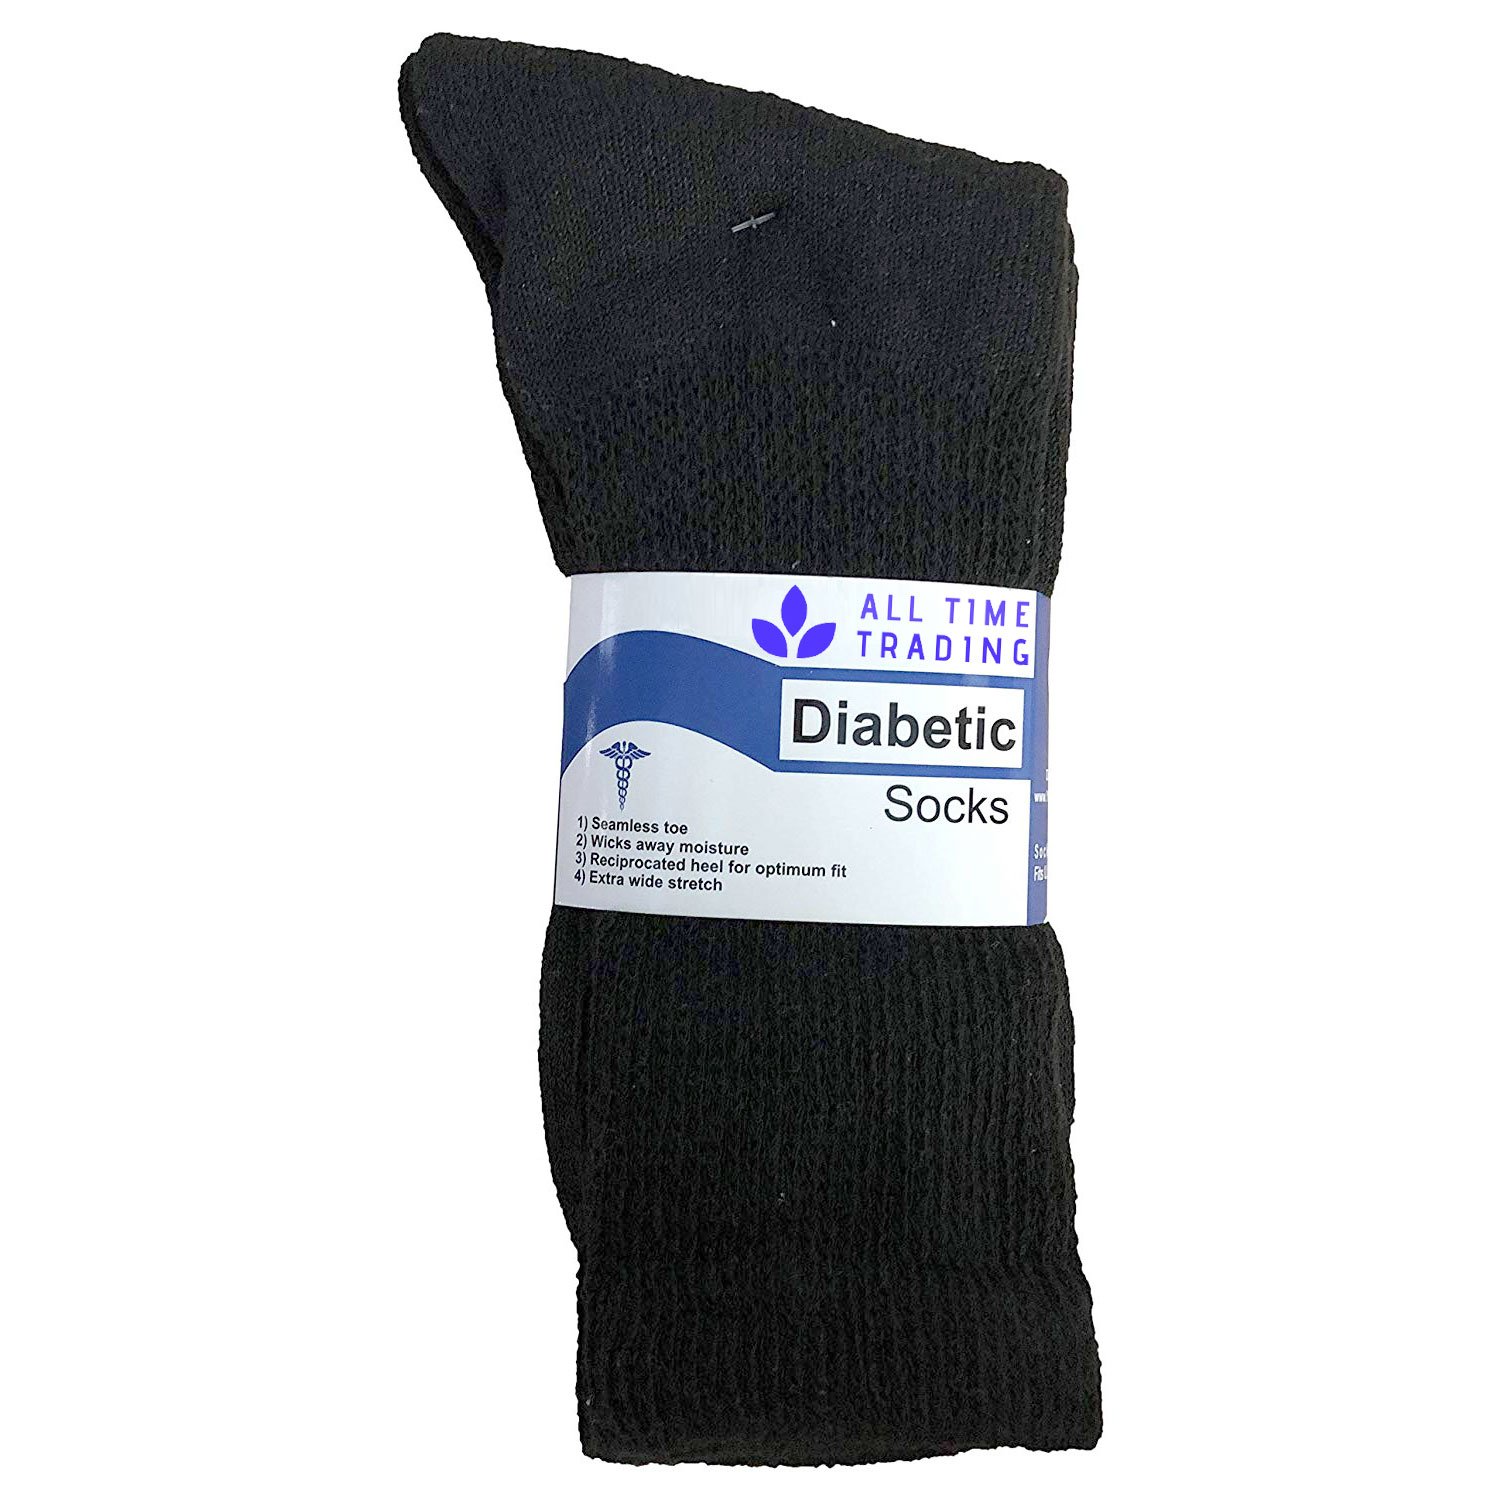 Physicians Approved Womens Diabetics Cotton Crew Socks - Womens Wholesale Diabetic Crew Socks - 9-11 - Black - 72 Pack - image 1 of 3